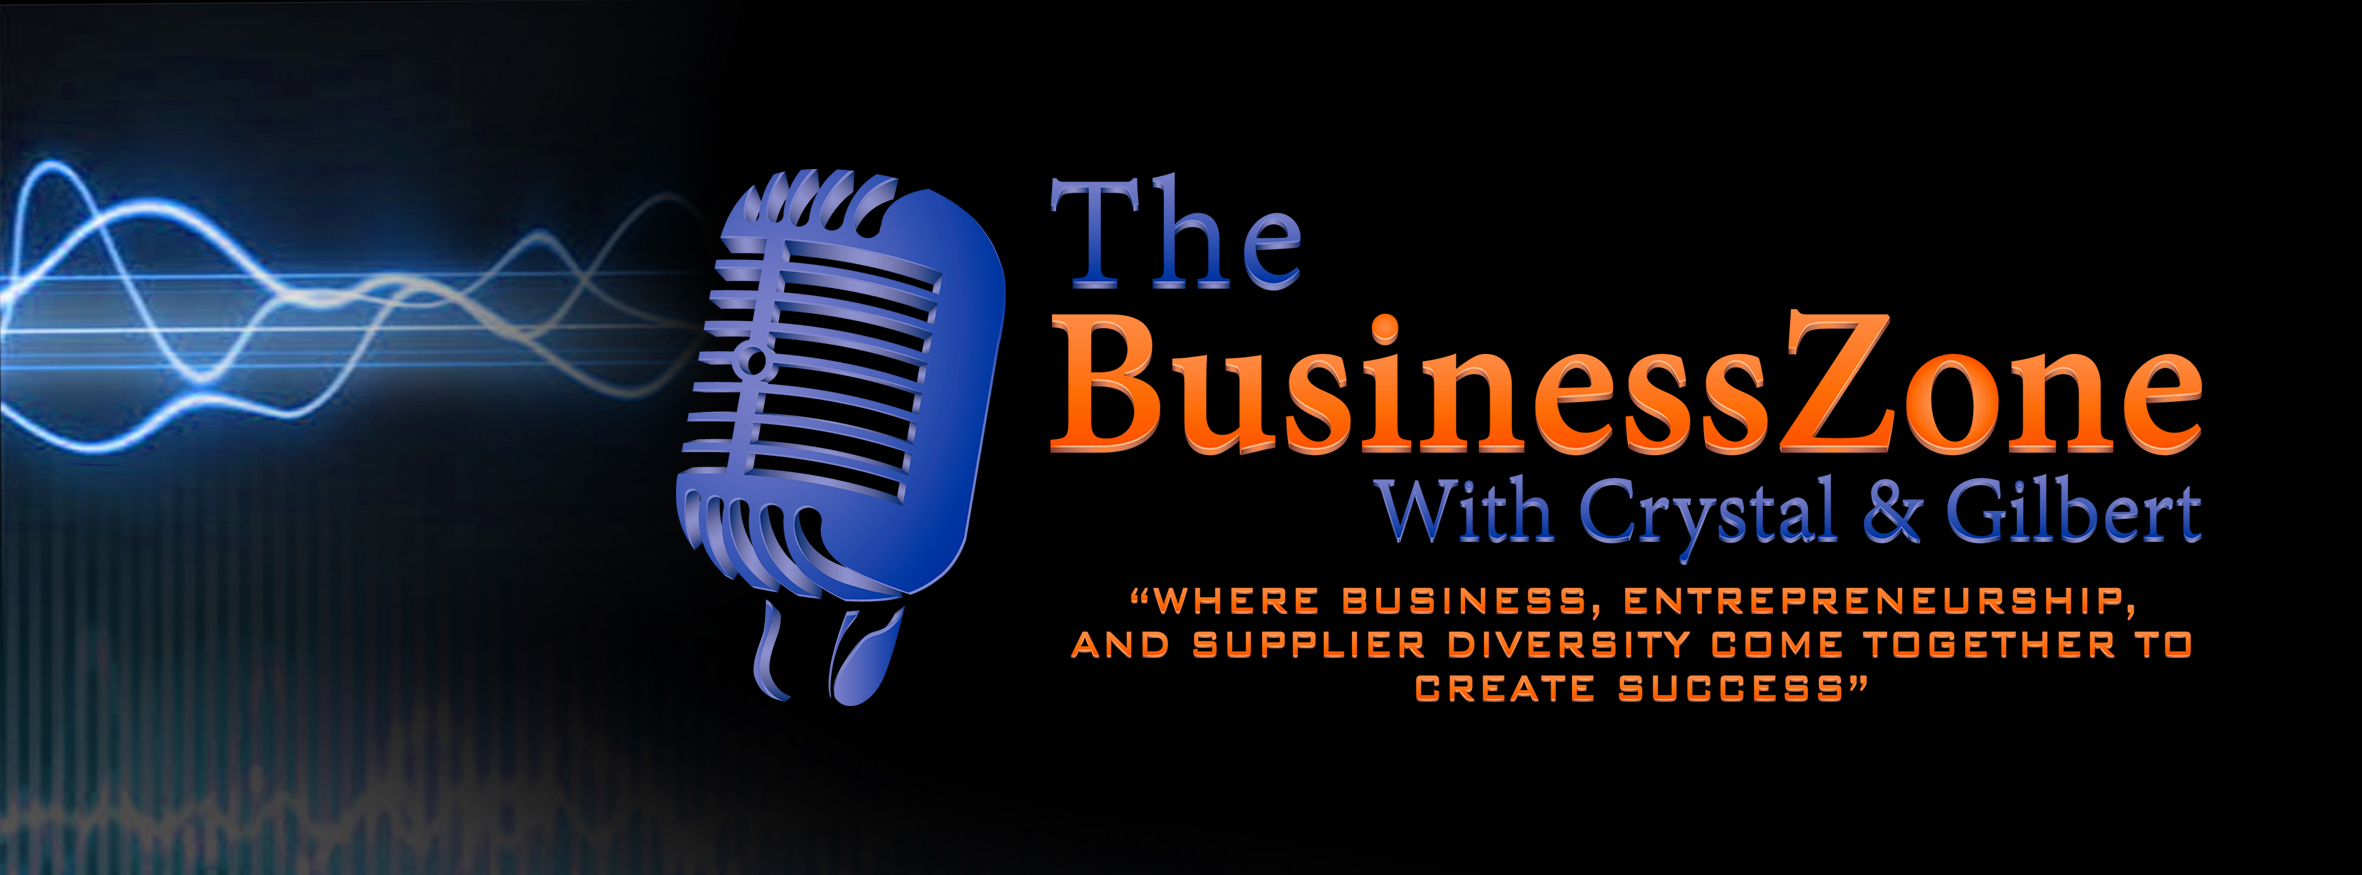 The BusinessZone - SPECIAL GUEST TOM NIX 6 16 17 